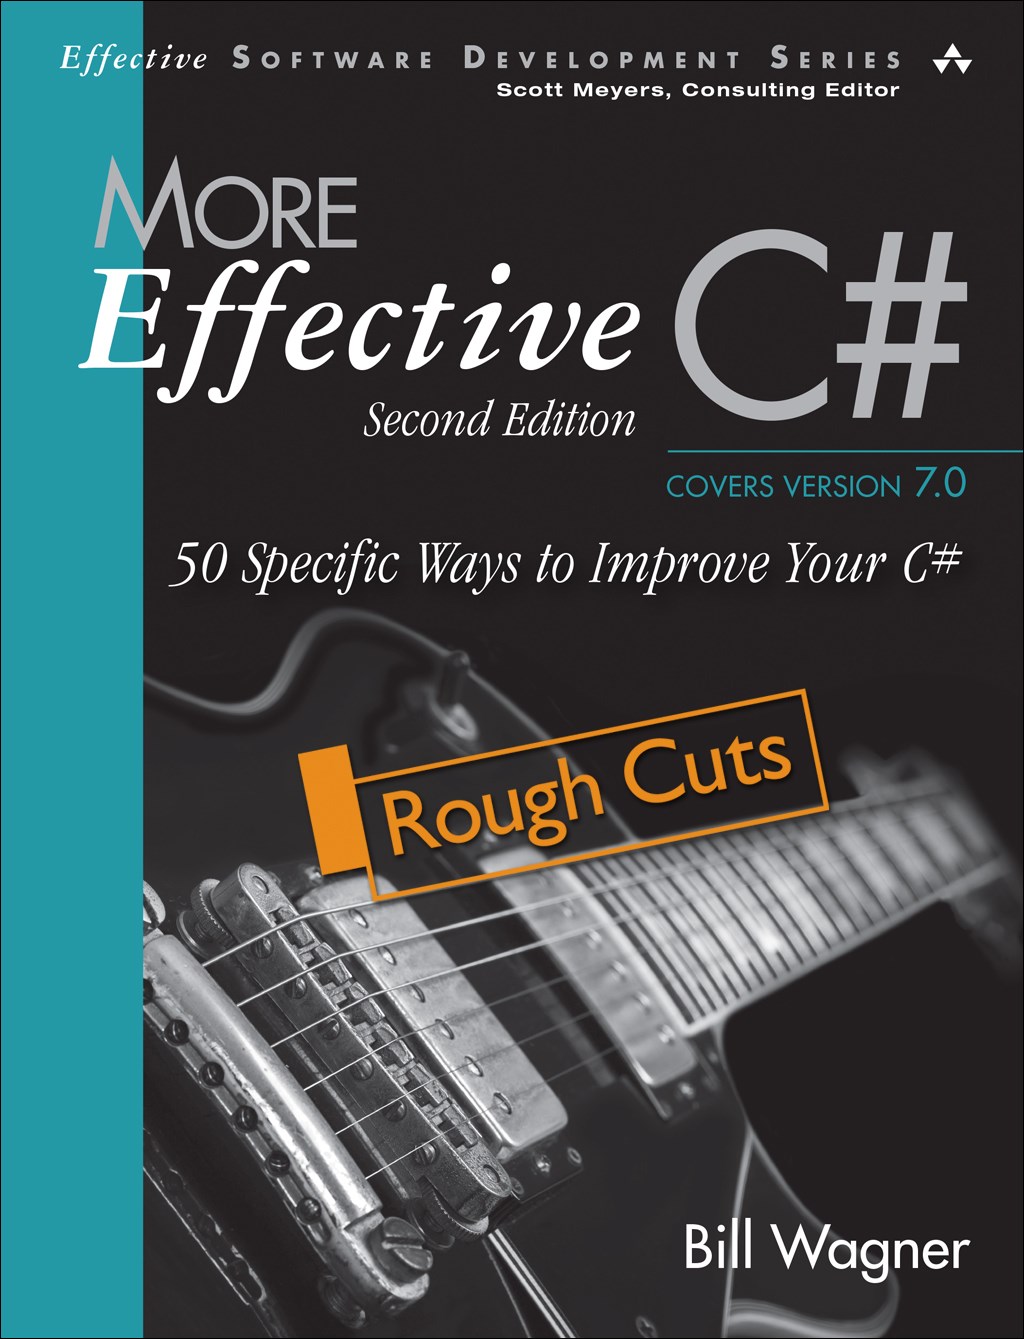 More Effective C#: 50 Specific Ways to Improve Your C#, Rough Cuts, 2nd Edition